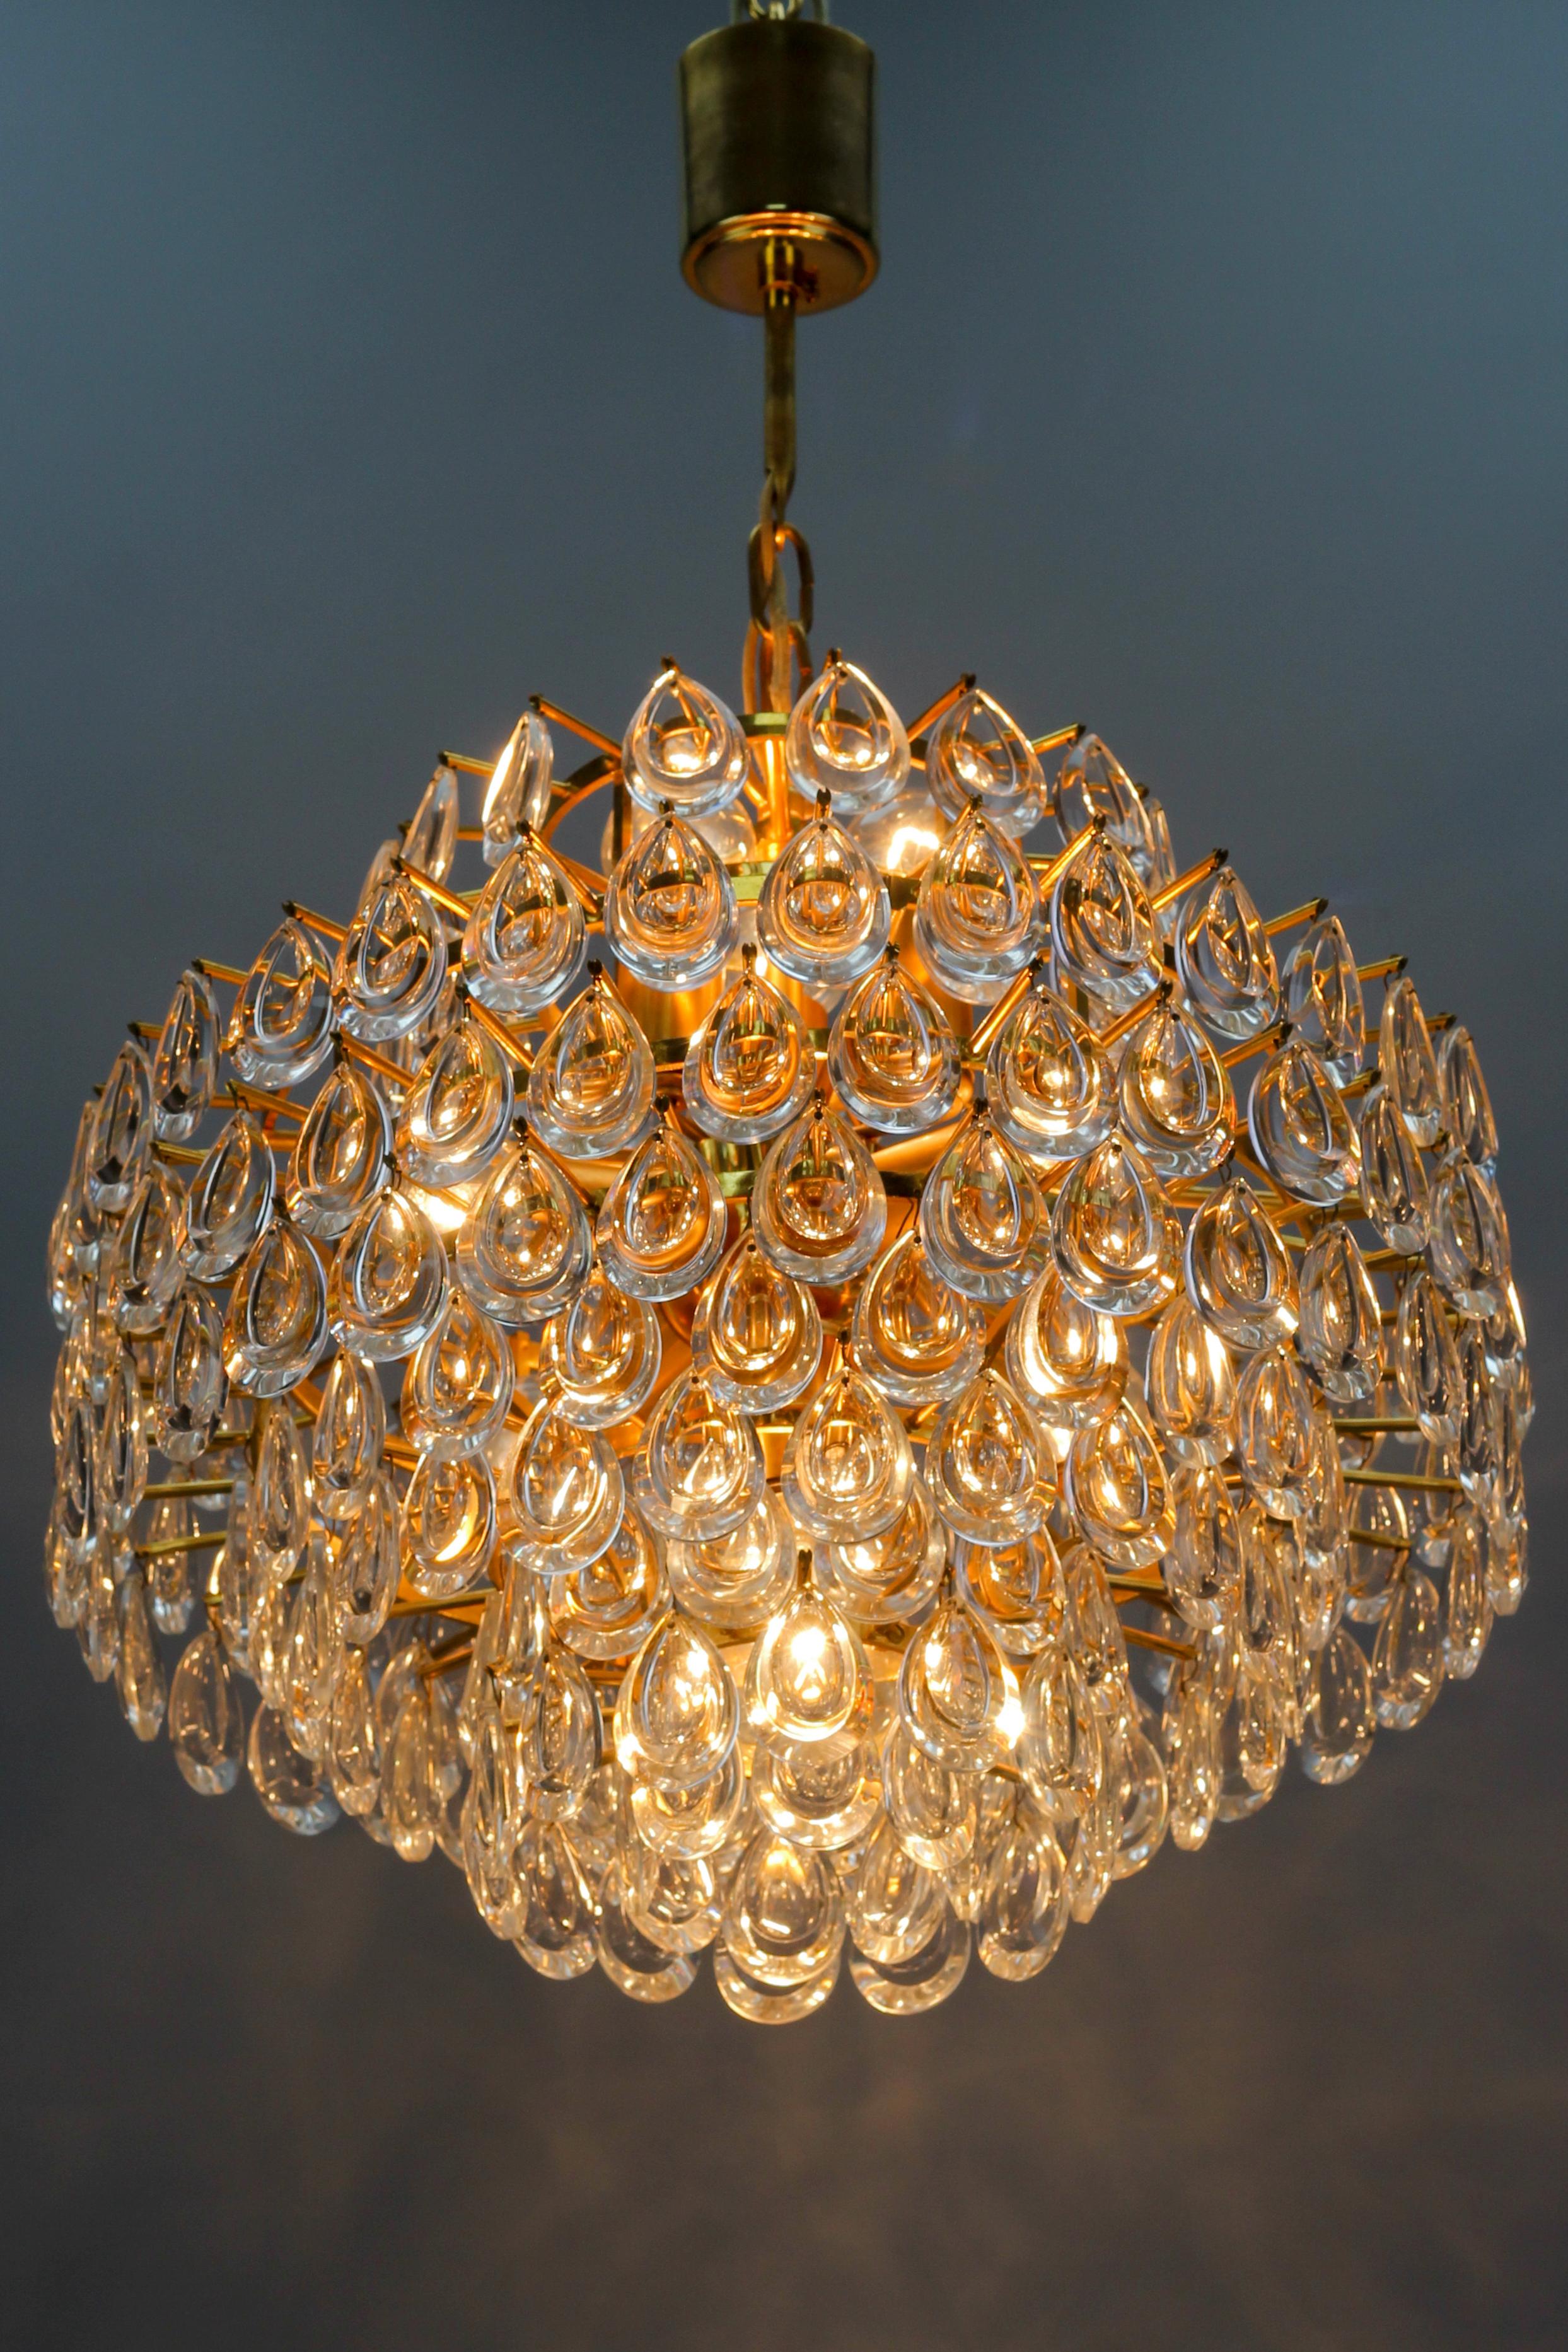 This impressive seven-tier chandelier by Palwa, manufacturer Palme & Walter, Germany, 1960s, features a gilded brass frame with 208 (+3 reserve) teardrop-shaped crystal glass prisms - lenses. 
Seven light points - six sockets for E14 and one socket